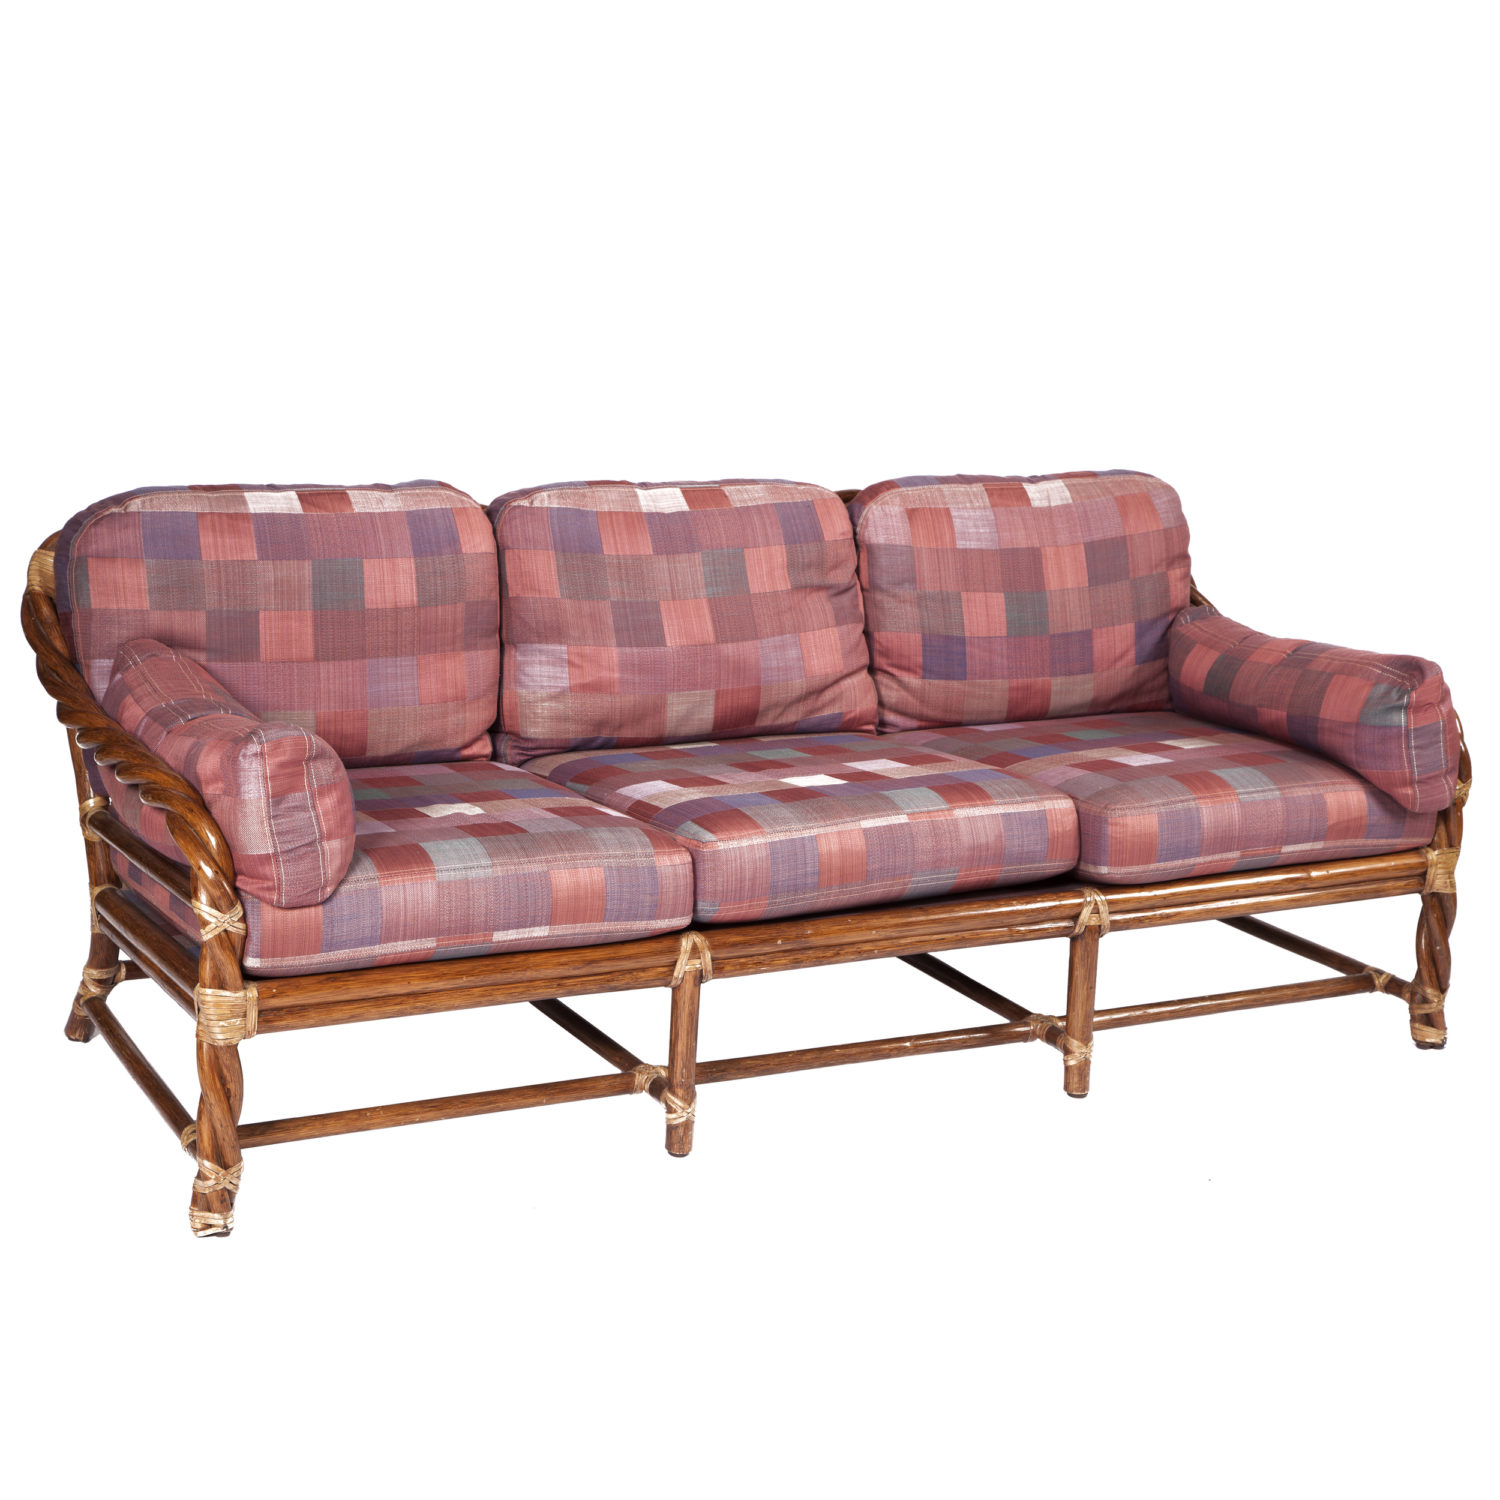 <p><a href="https://finesf.com/lot/mcguire-sofa-4019117">McGuire Twist  Couch by Elinor and John McGuire (A-50/SL)</a></p>